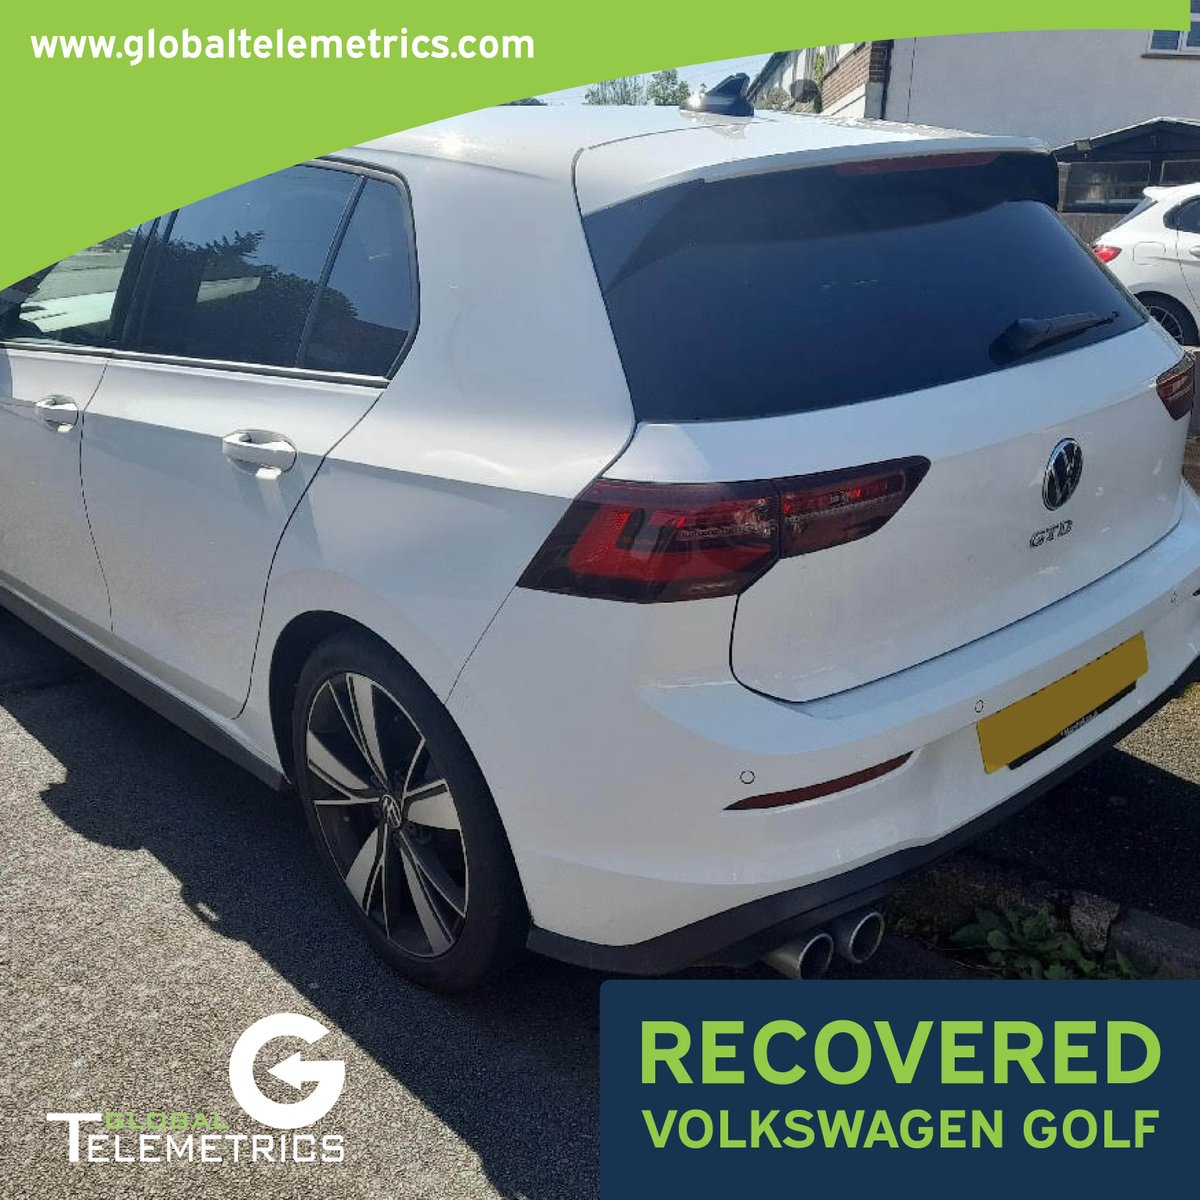 In just under an hour of being confirmed stolen, our fantastic Repatriations Team, armed with data from our tracking device were able to secure and recover this stolen Volkswagen Golf alongside the police!

#Golf #VW #Volkswagen #VWGolf #Tracked #DisruptingCriminality…